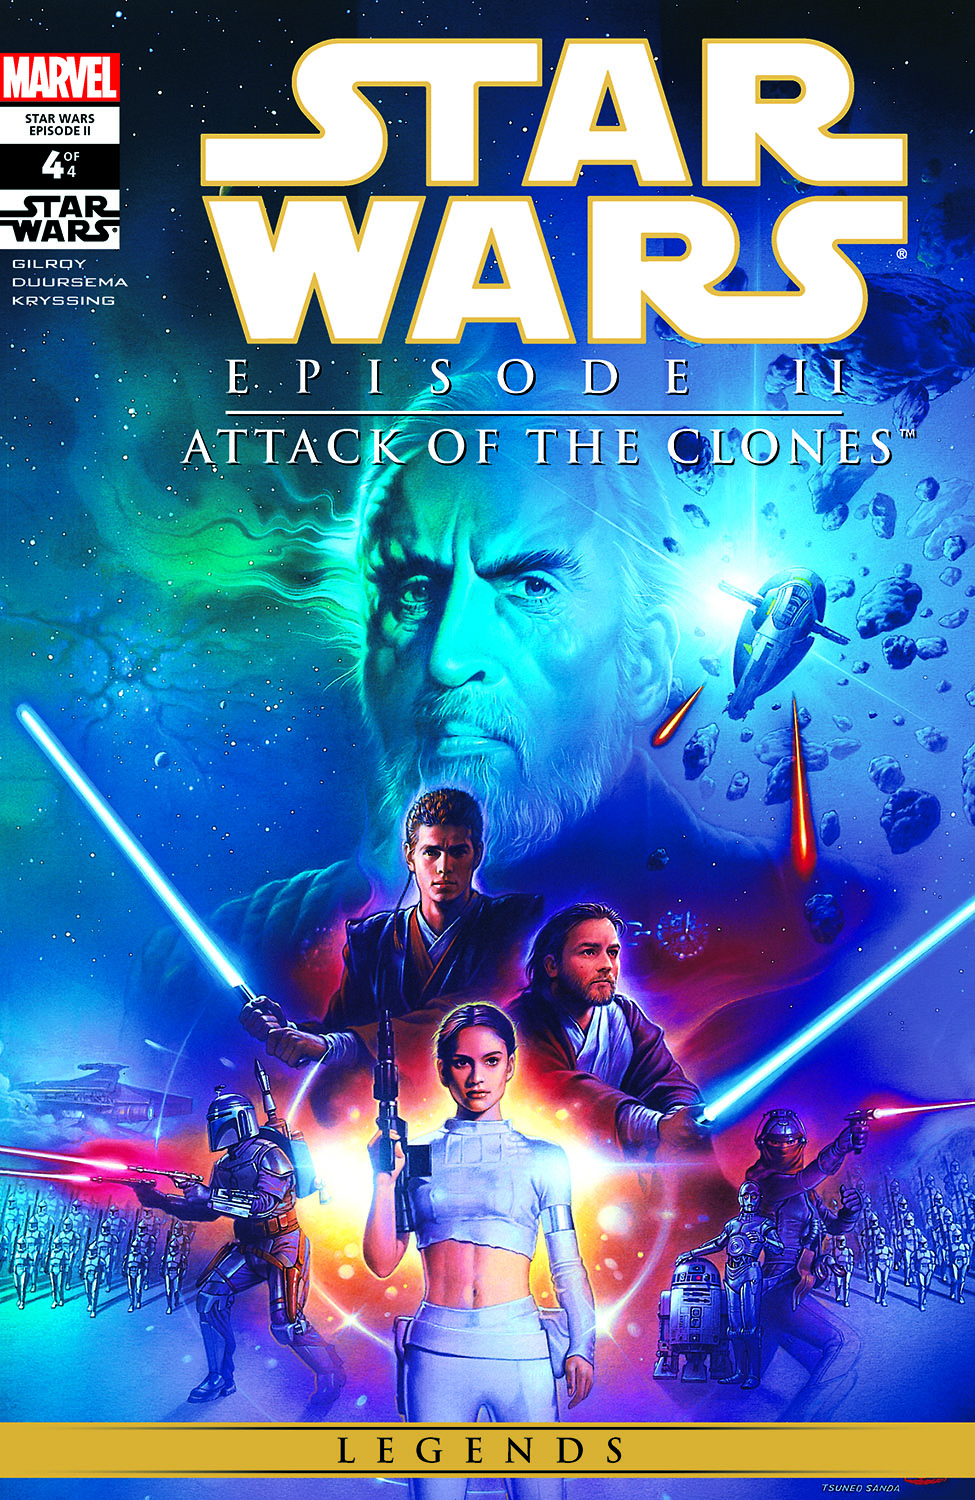 Star Wars: Episode II – Attack of the Clones (2002) Hindi Dubbed 400MB HDRip 480p